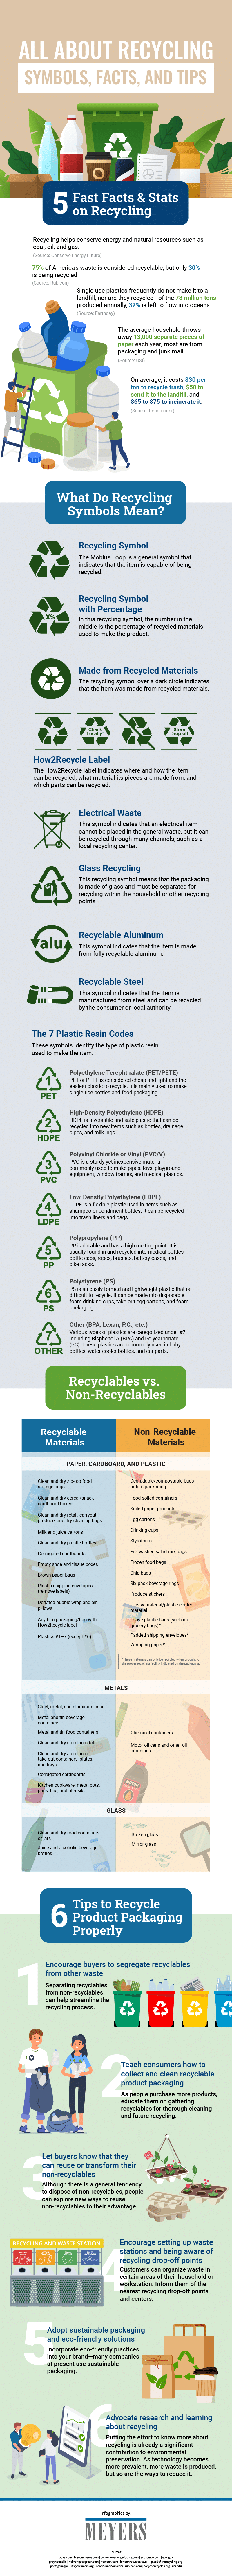 An infographic about Recycling: Symbols, Facts, and Tips